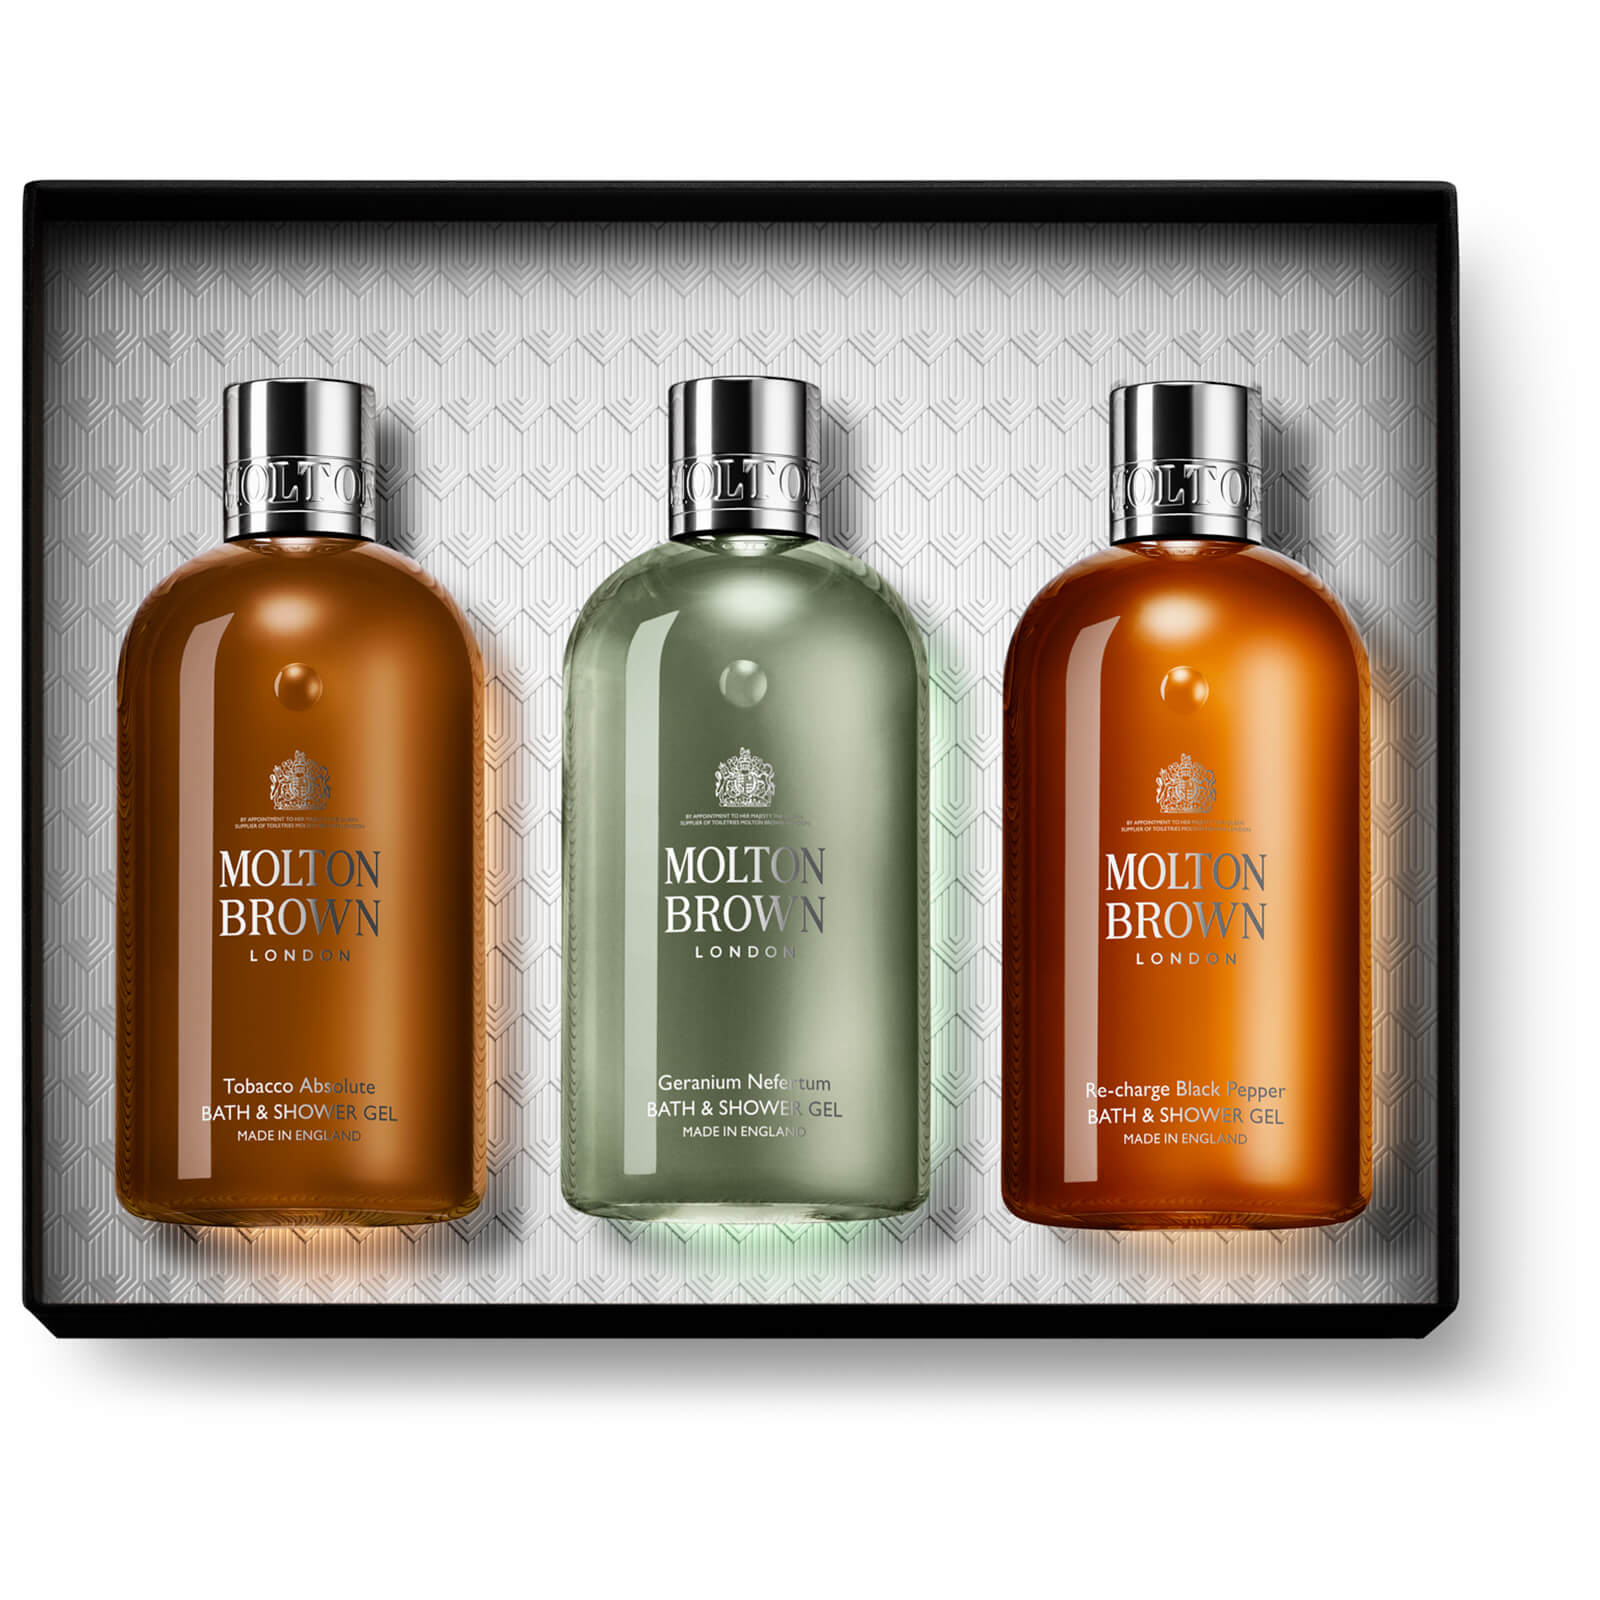 Molton Brown Woody and Citrus Gift Set